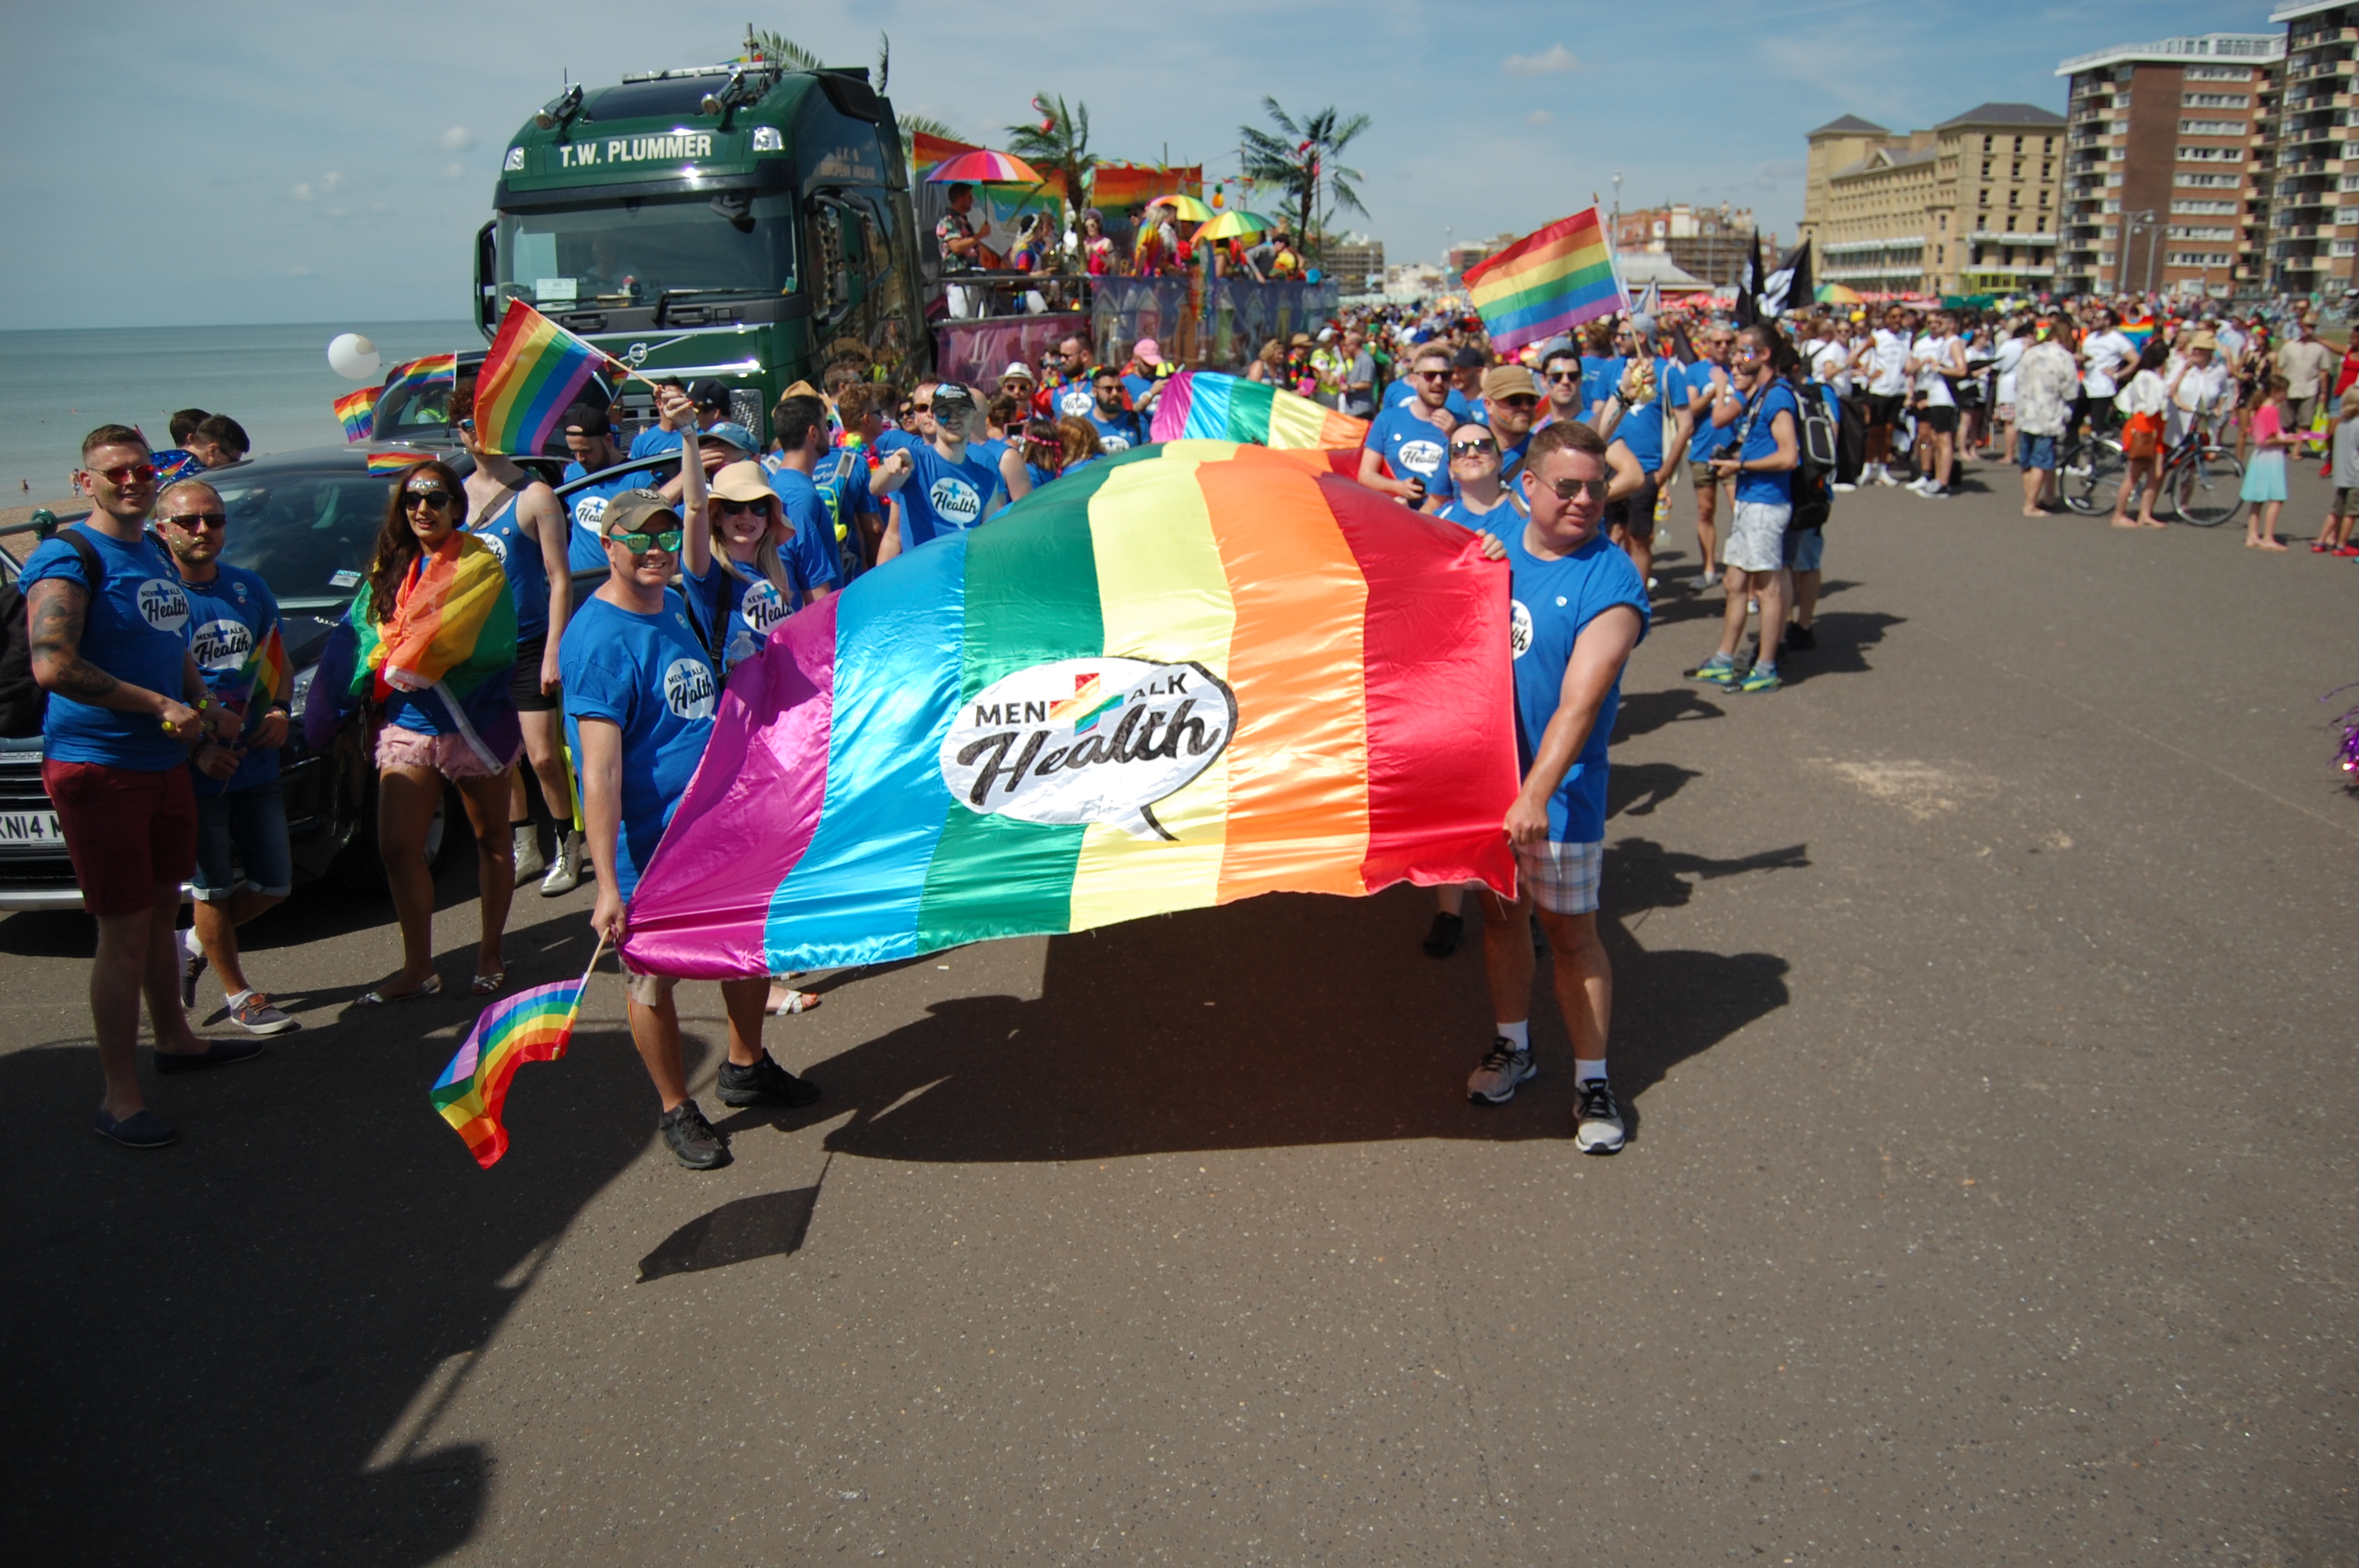 Northstar IT team supporting MenTalkHealth UK charity at Brighton Pride 2019, carrying a rainbow flag.